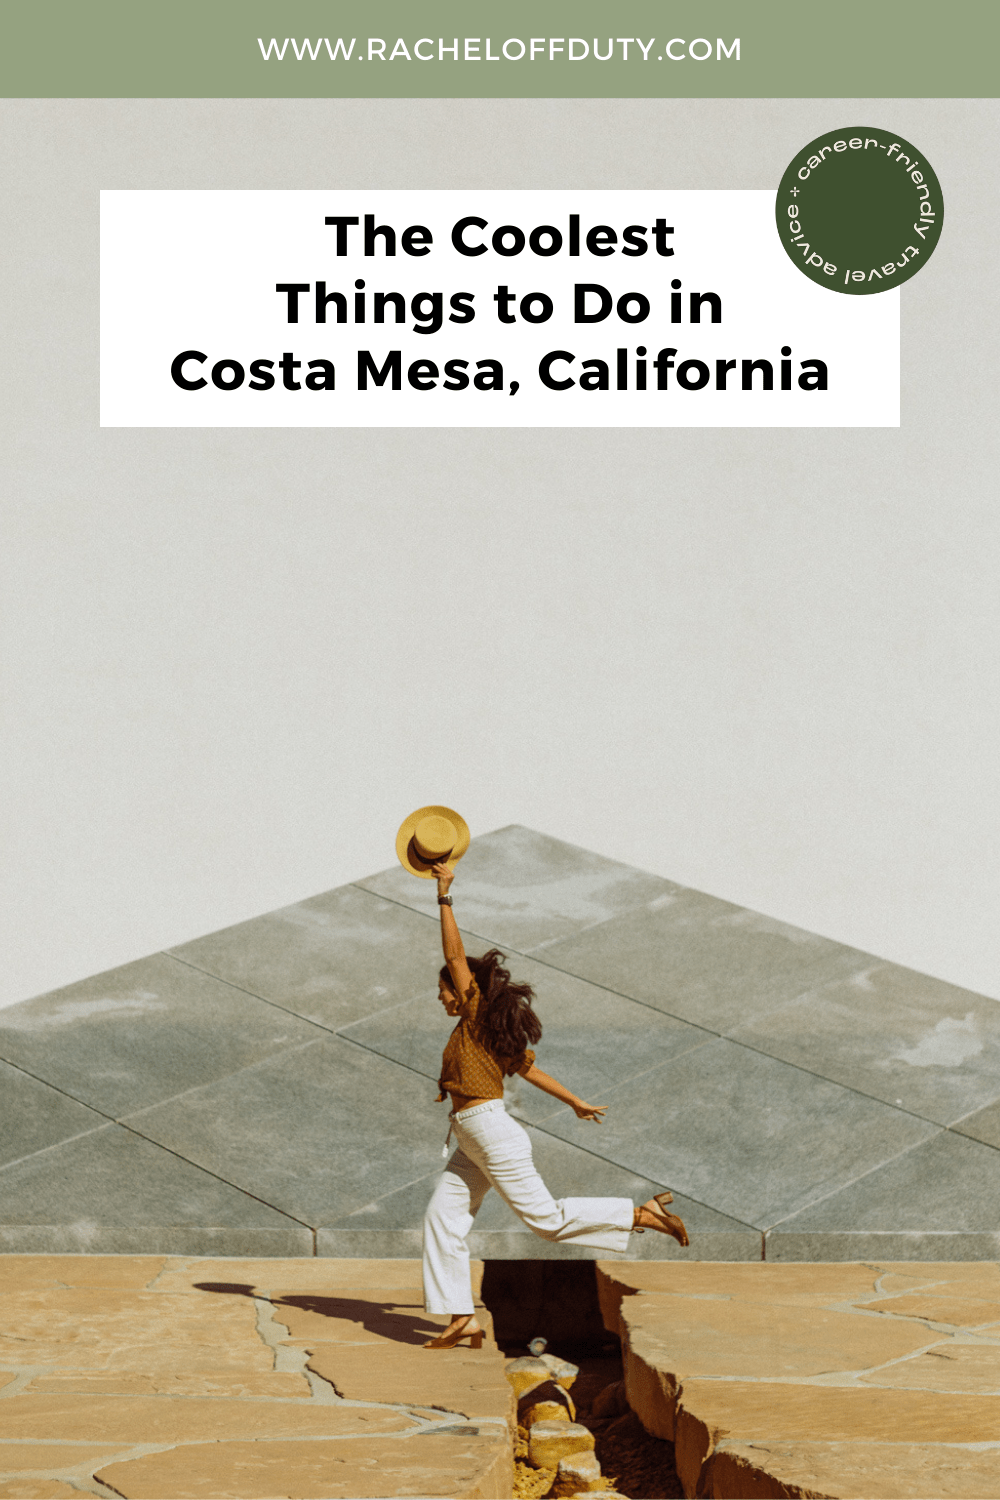 Rachel Off Duty: The Coolest Things to Do in Costa Mesa, California